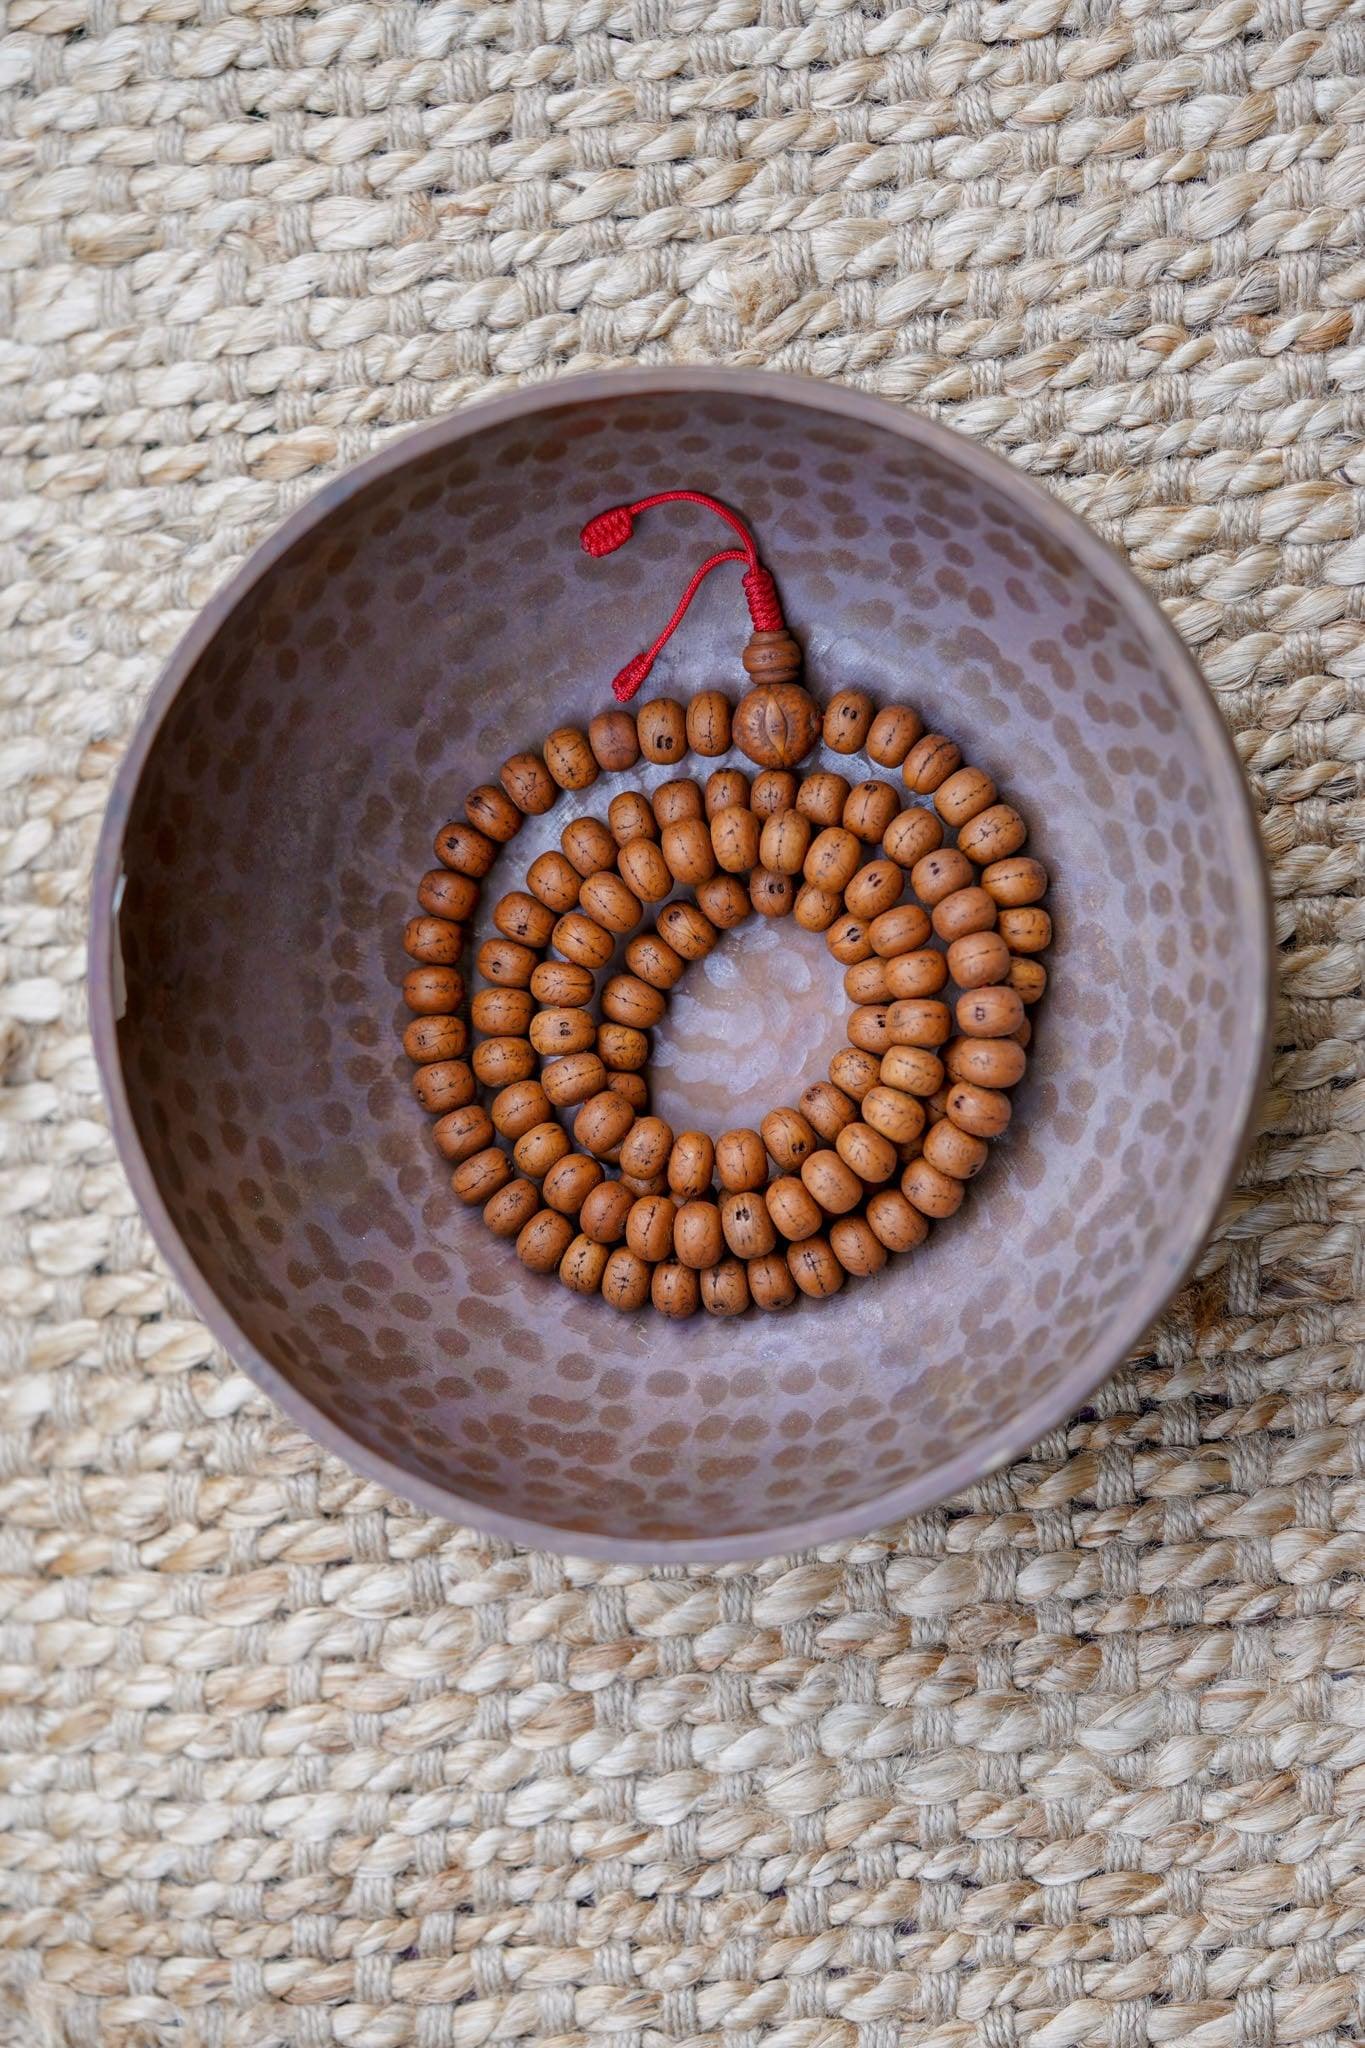 Products 14 mm Bodhi Bead being kept on a copper bowl.